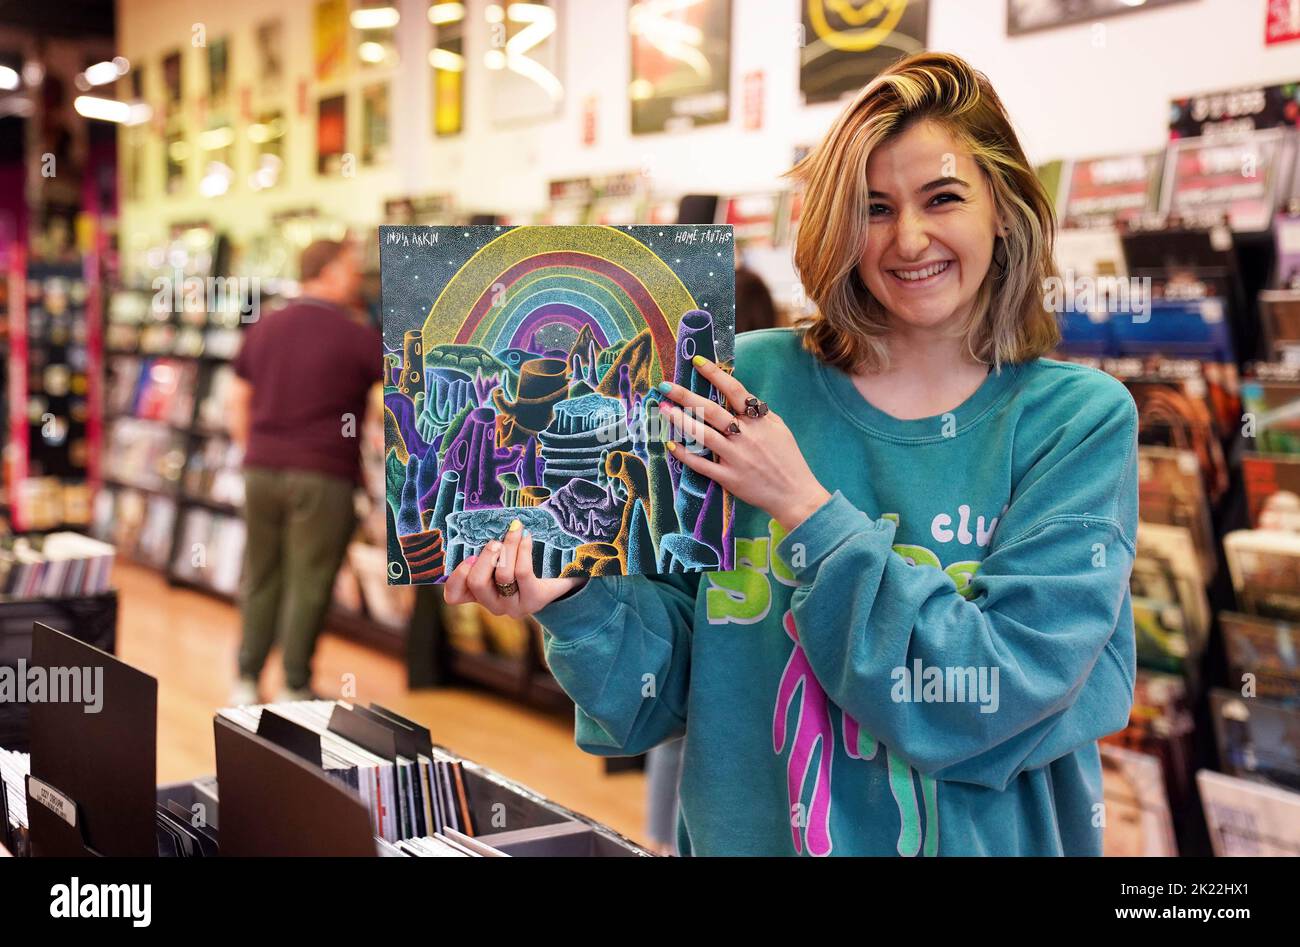 EDITORIAL USE ONLY India Arkin appears at an hmv store in Newcastle as part of the launch of its new record label, 1921 Records, ahead of National Album Day on Saturday October 15. Issue date: Thursday September 22, 2022. Stock Photo